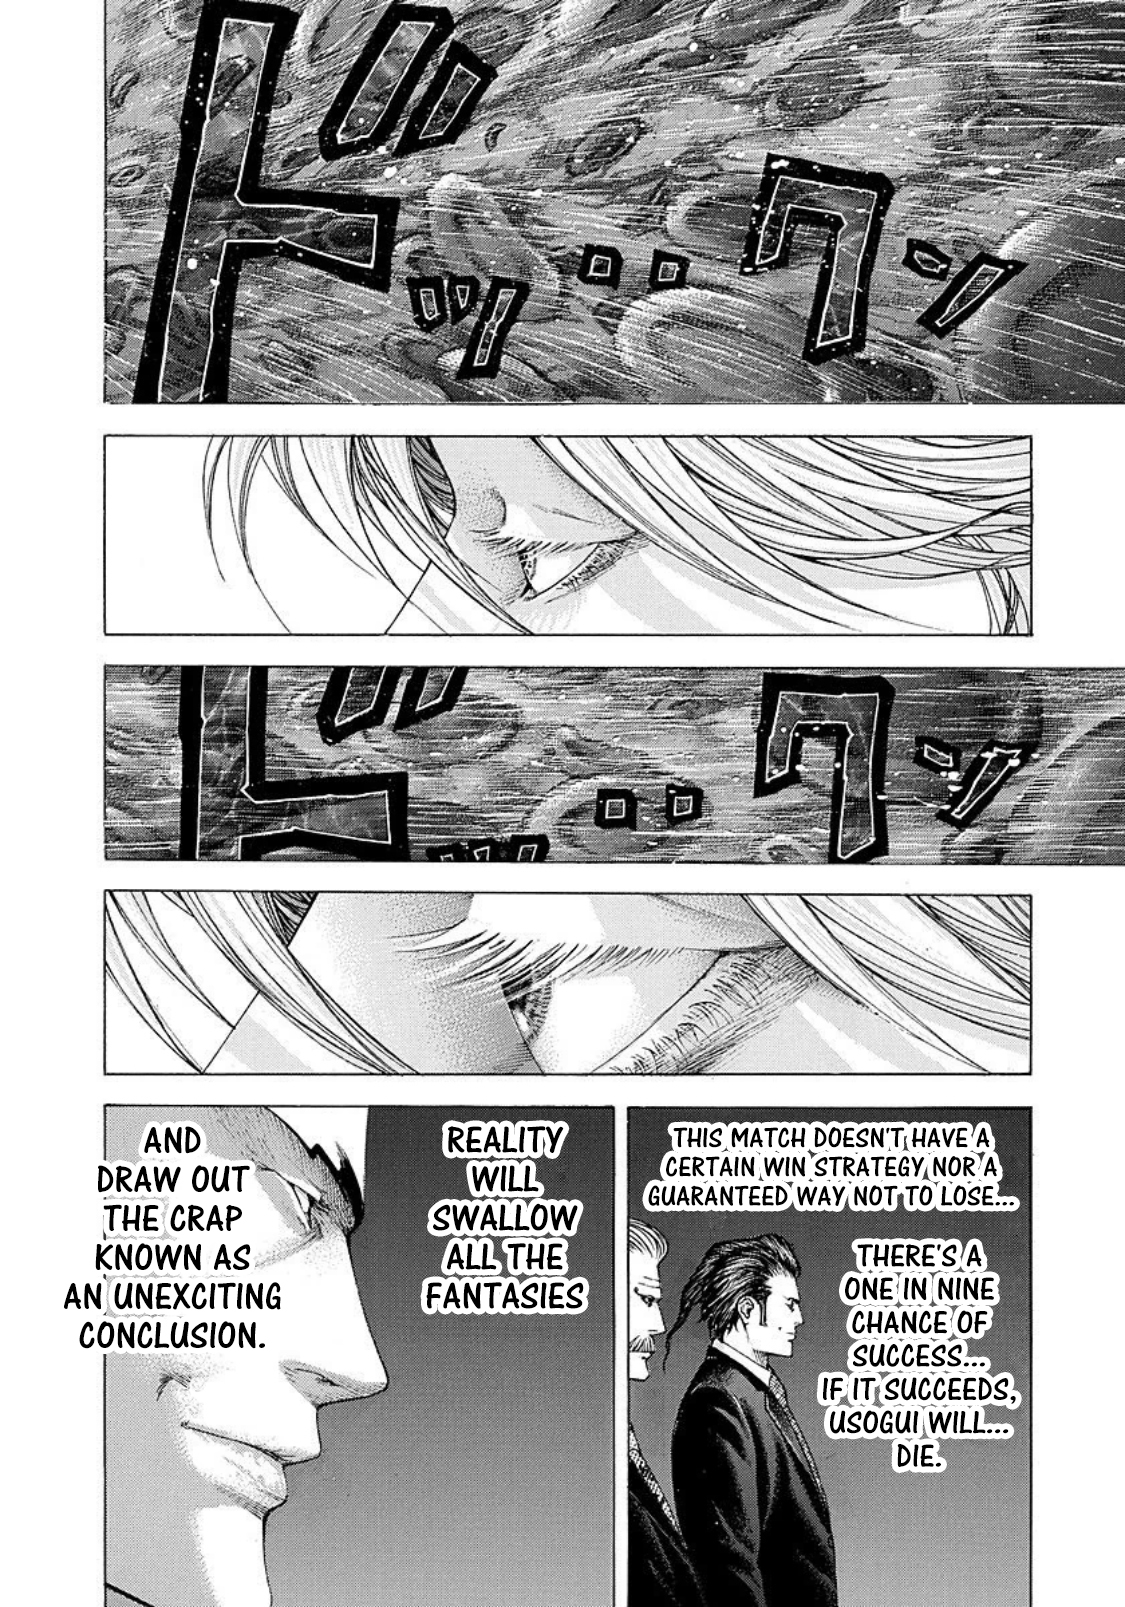 Usogui Vol. 20 Ch. 212 The Beast That Was Called Upon